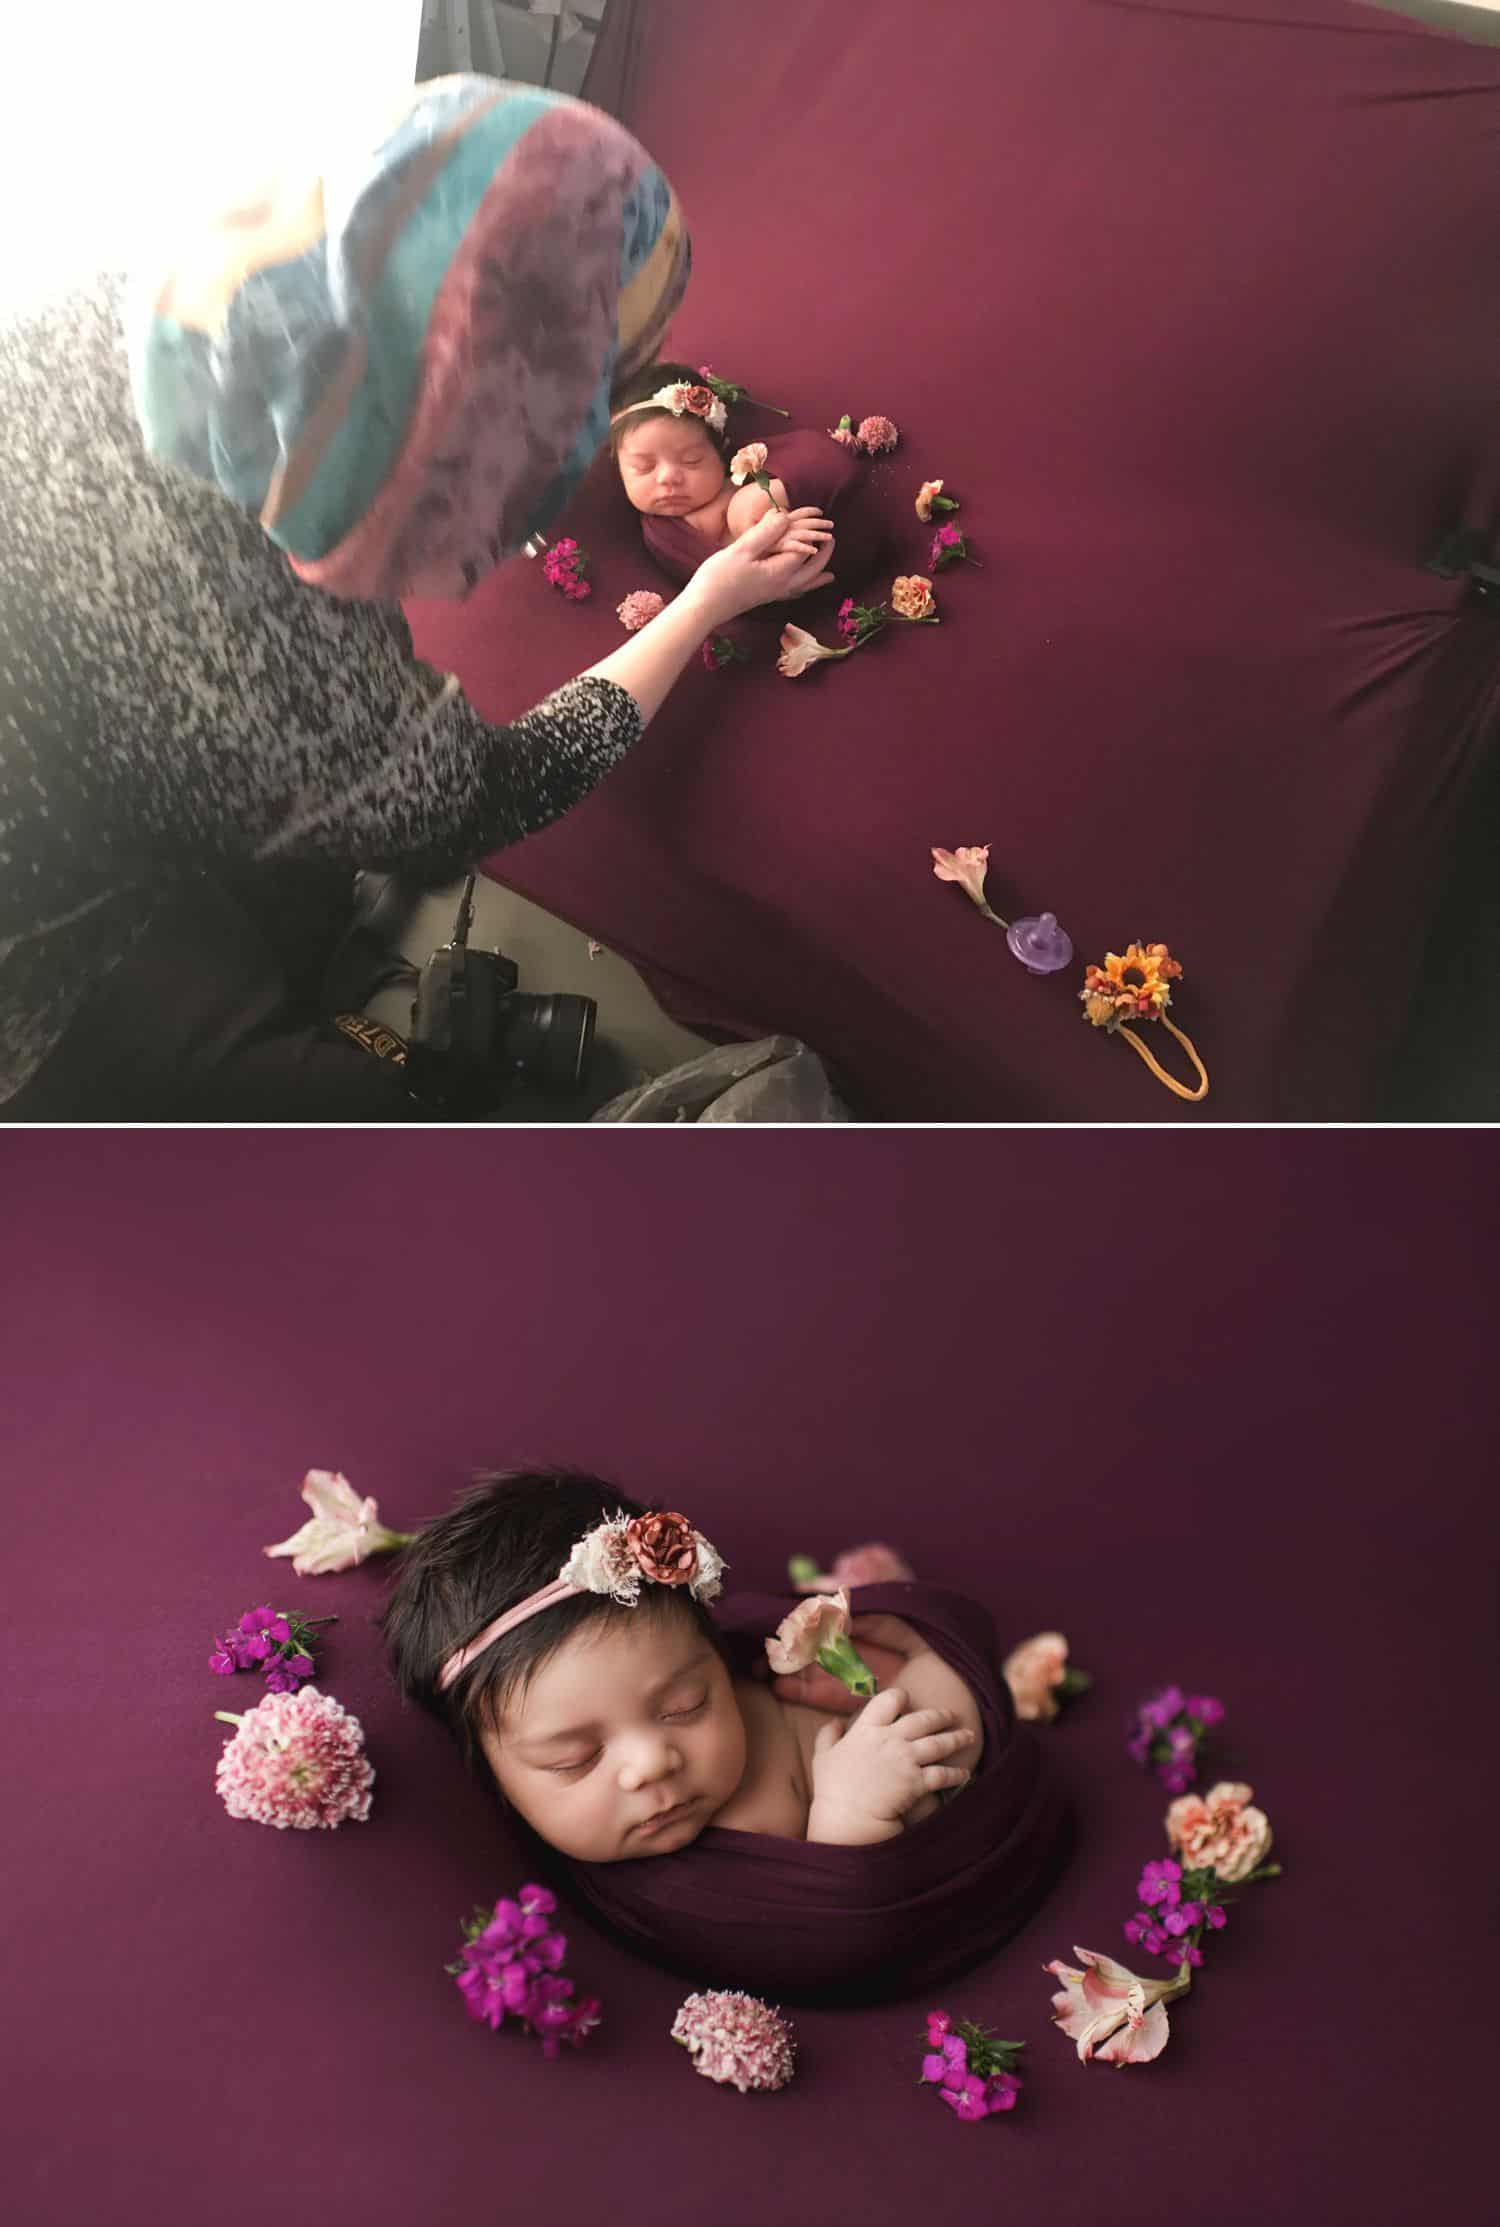 40 Newborn Photo Ideas for Boys & Girls at Home or Studio